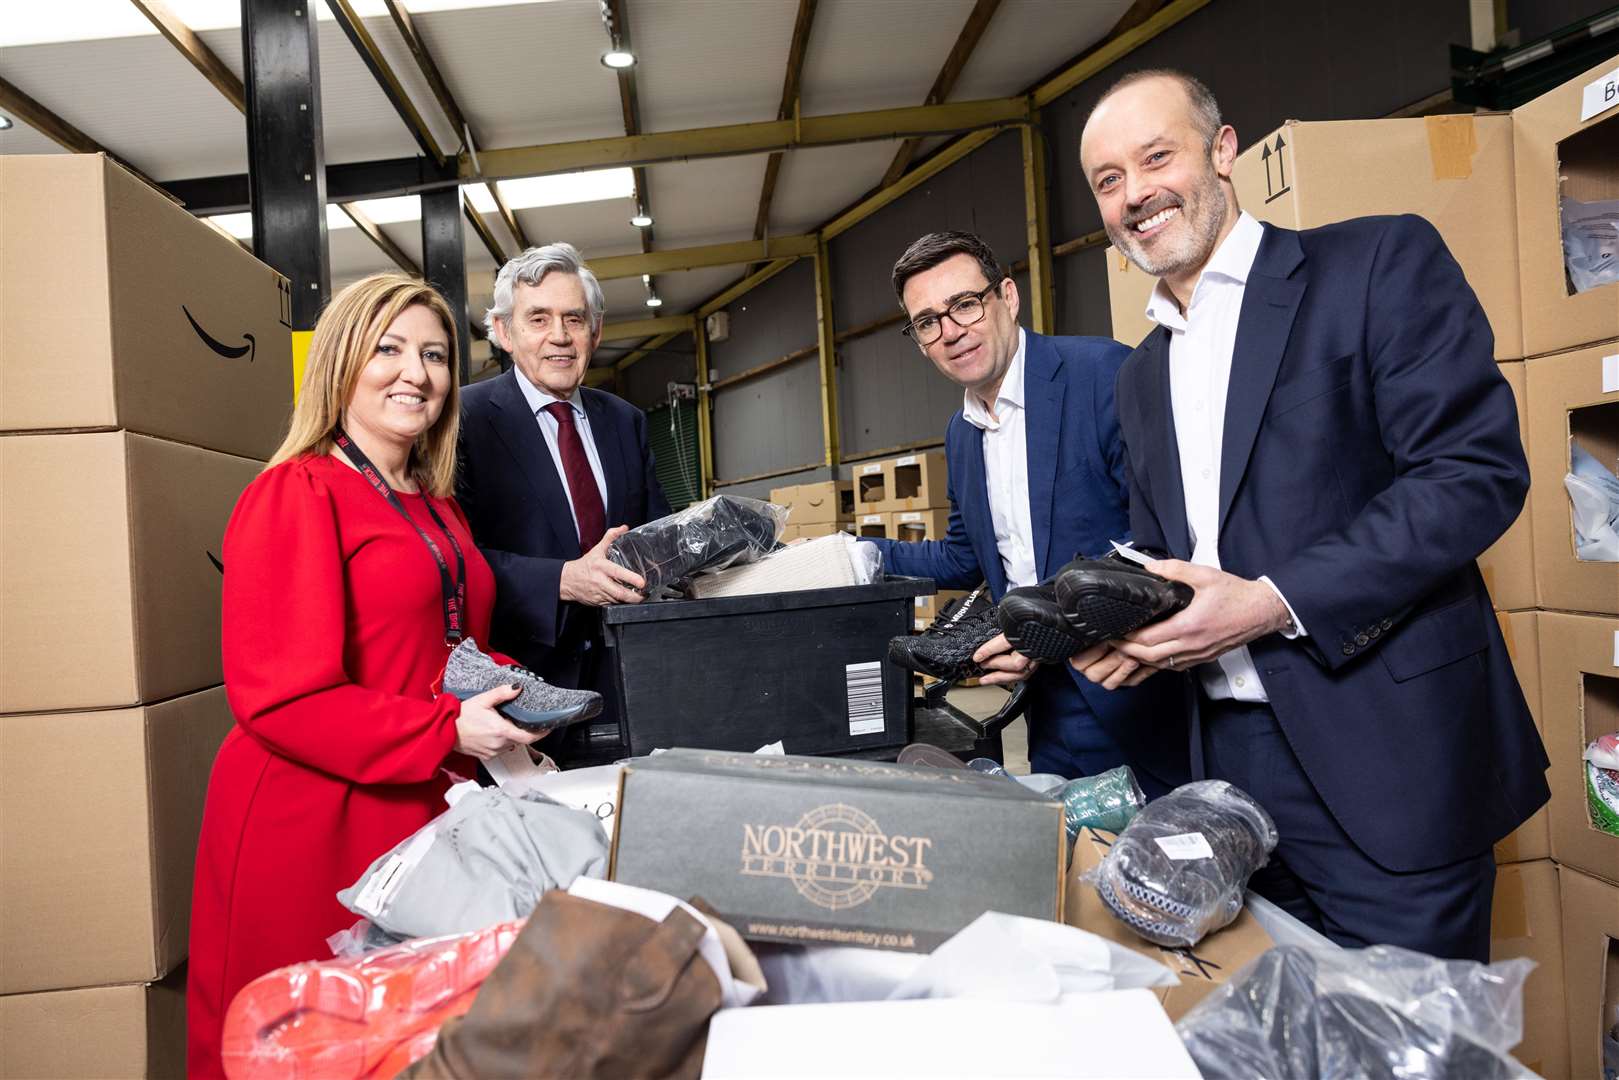 CEO of The Brick charity Keeley Dalfen, former PM Gordon Brown, Greater Manchester Mayor Andy Burnham and Amazon’s UK country manager John Boumphrey attend the launch of the scheme in Wigan (James Speakman/PA)